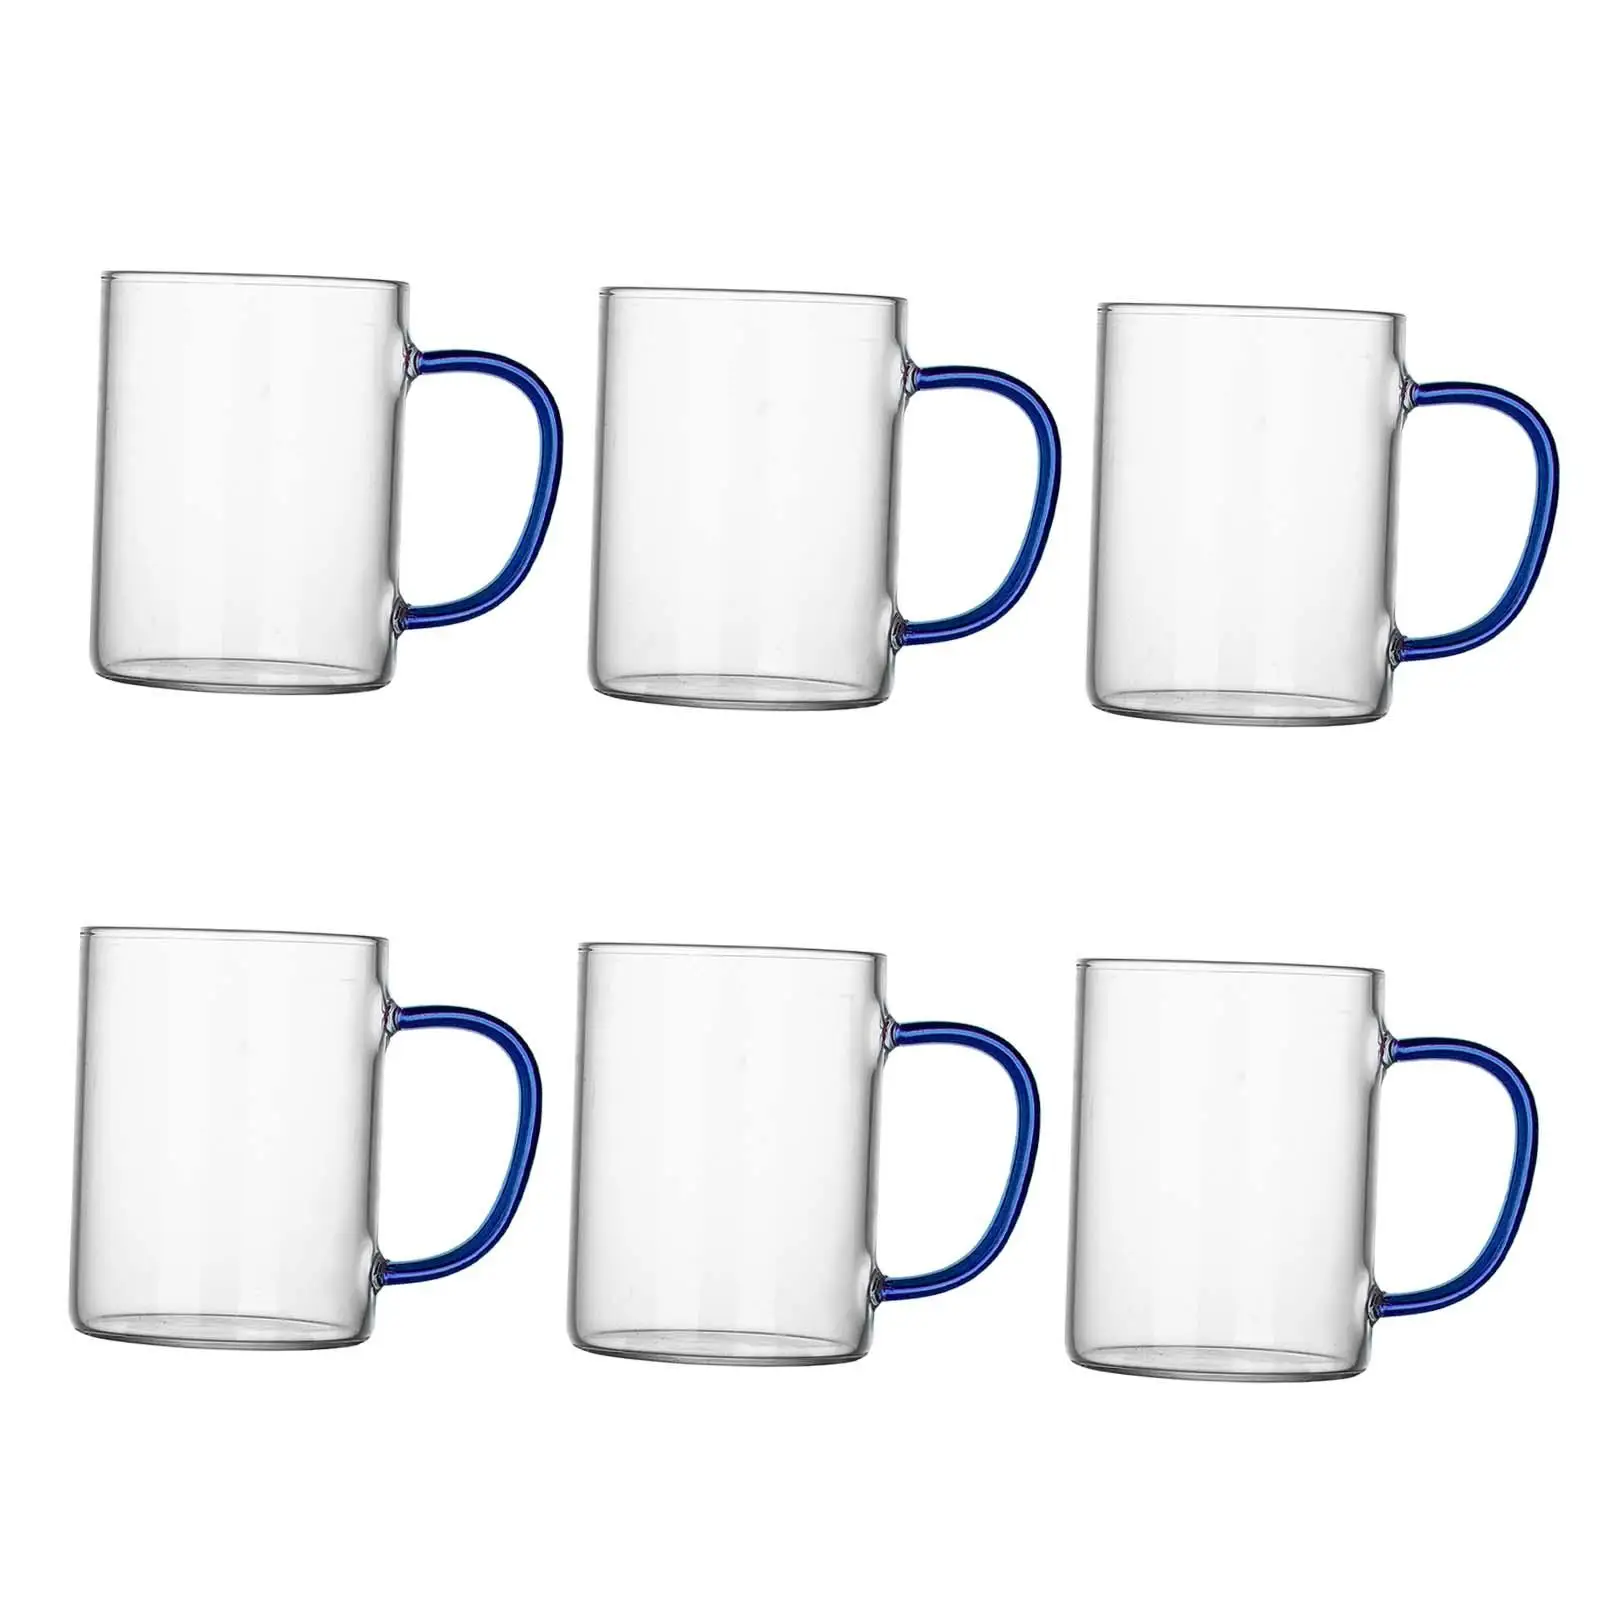 6x Water Cup 300ml Clear Glass Mug with Handle Drinking Glass Glass Cup for Tea Hot/Cold Beverage Latte Cappuccinos Office